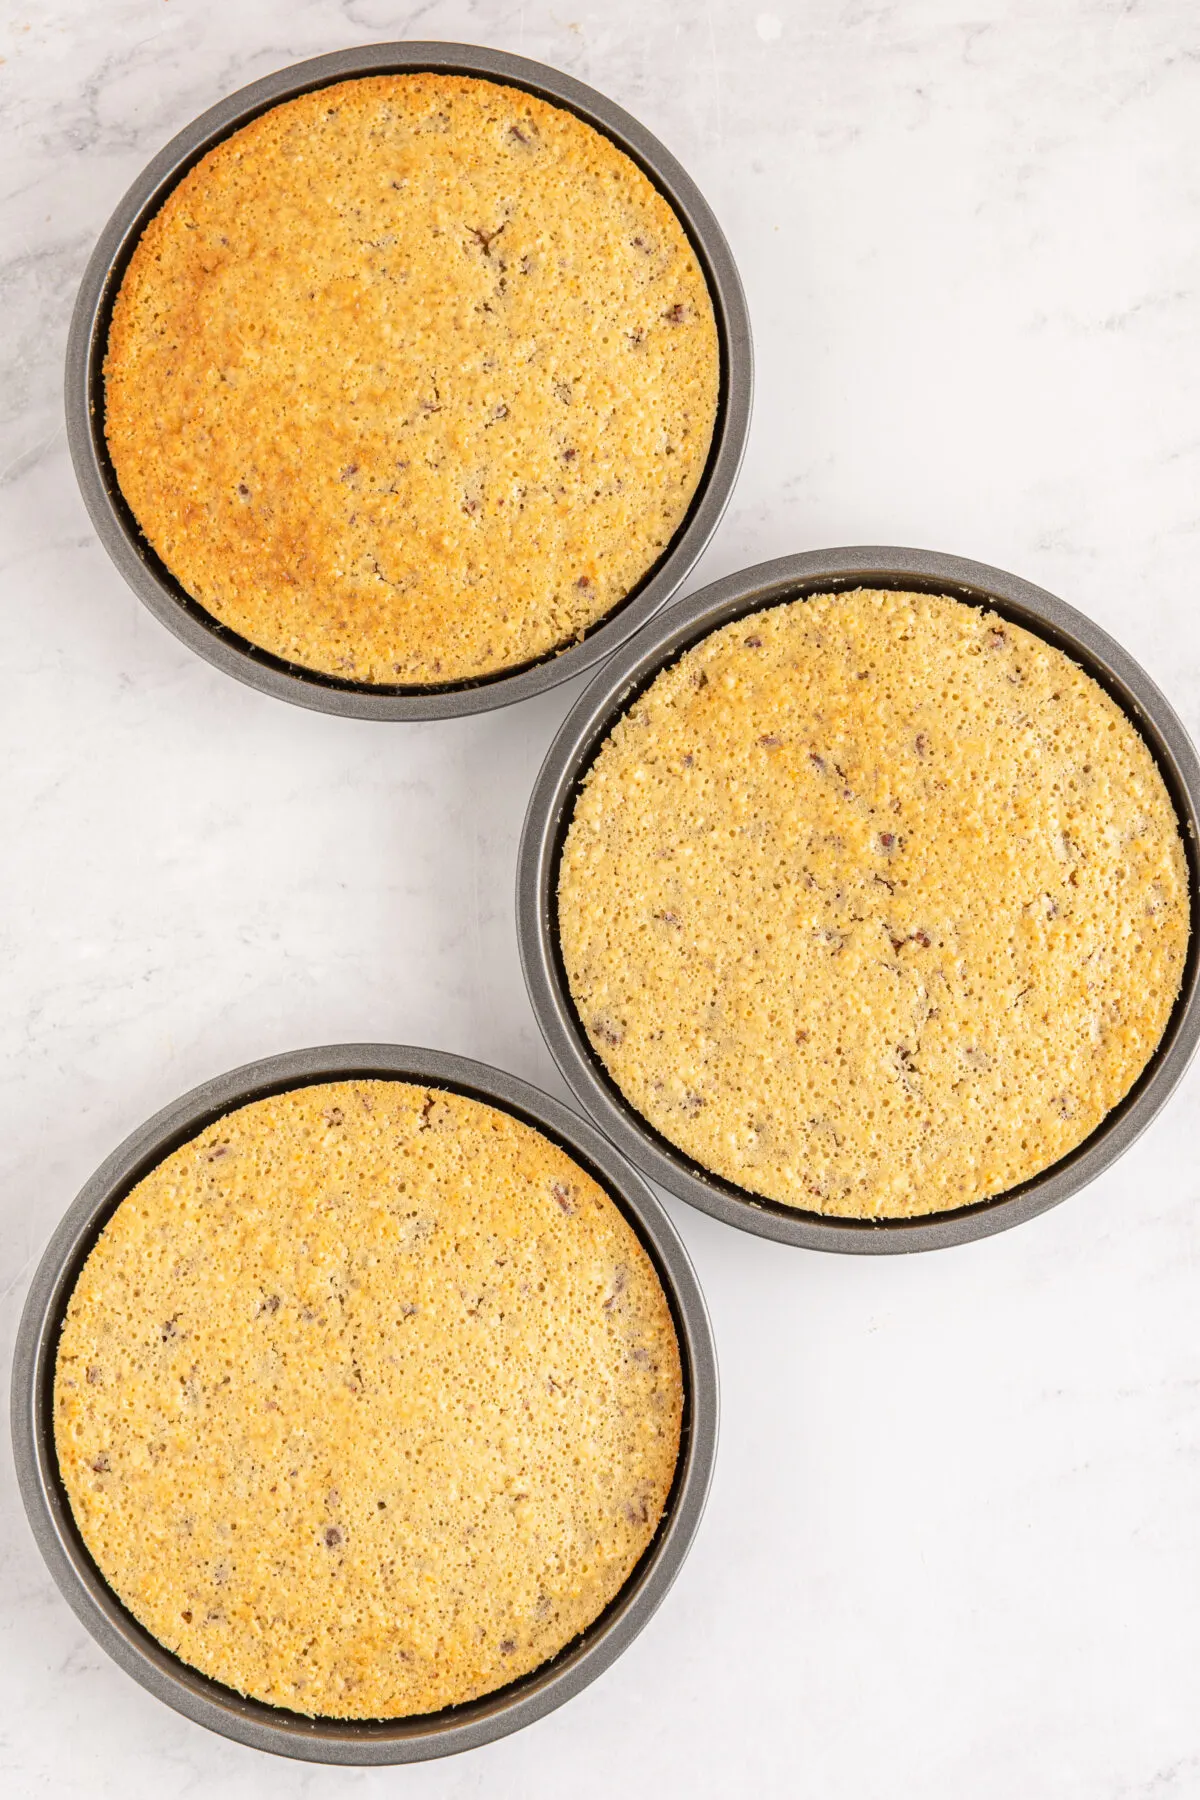 Cakes baked in three cake pans.